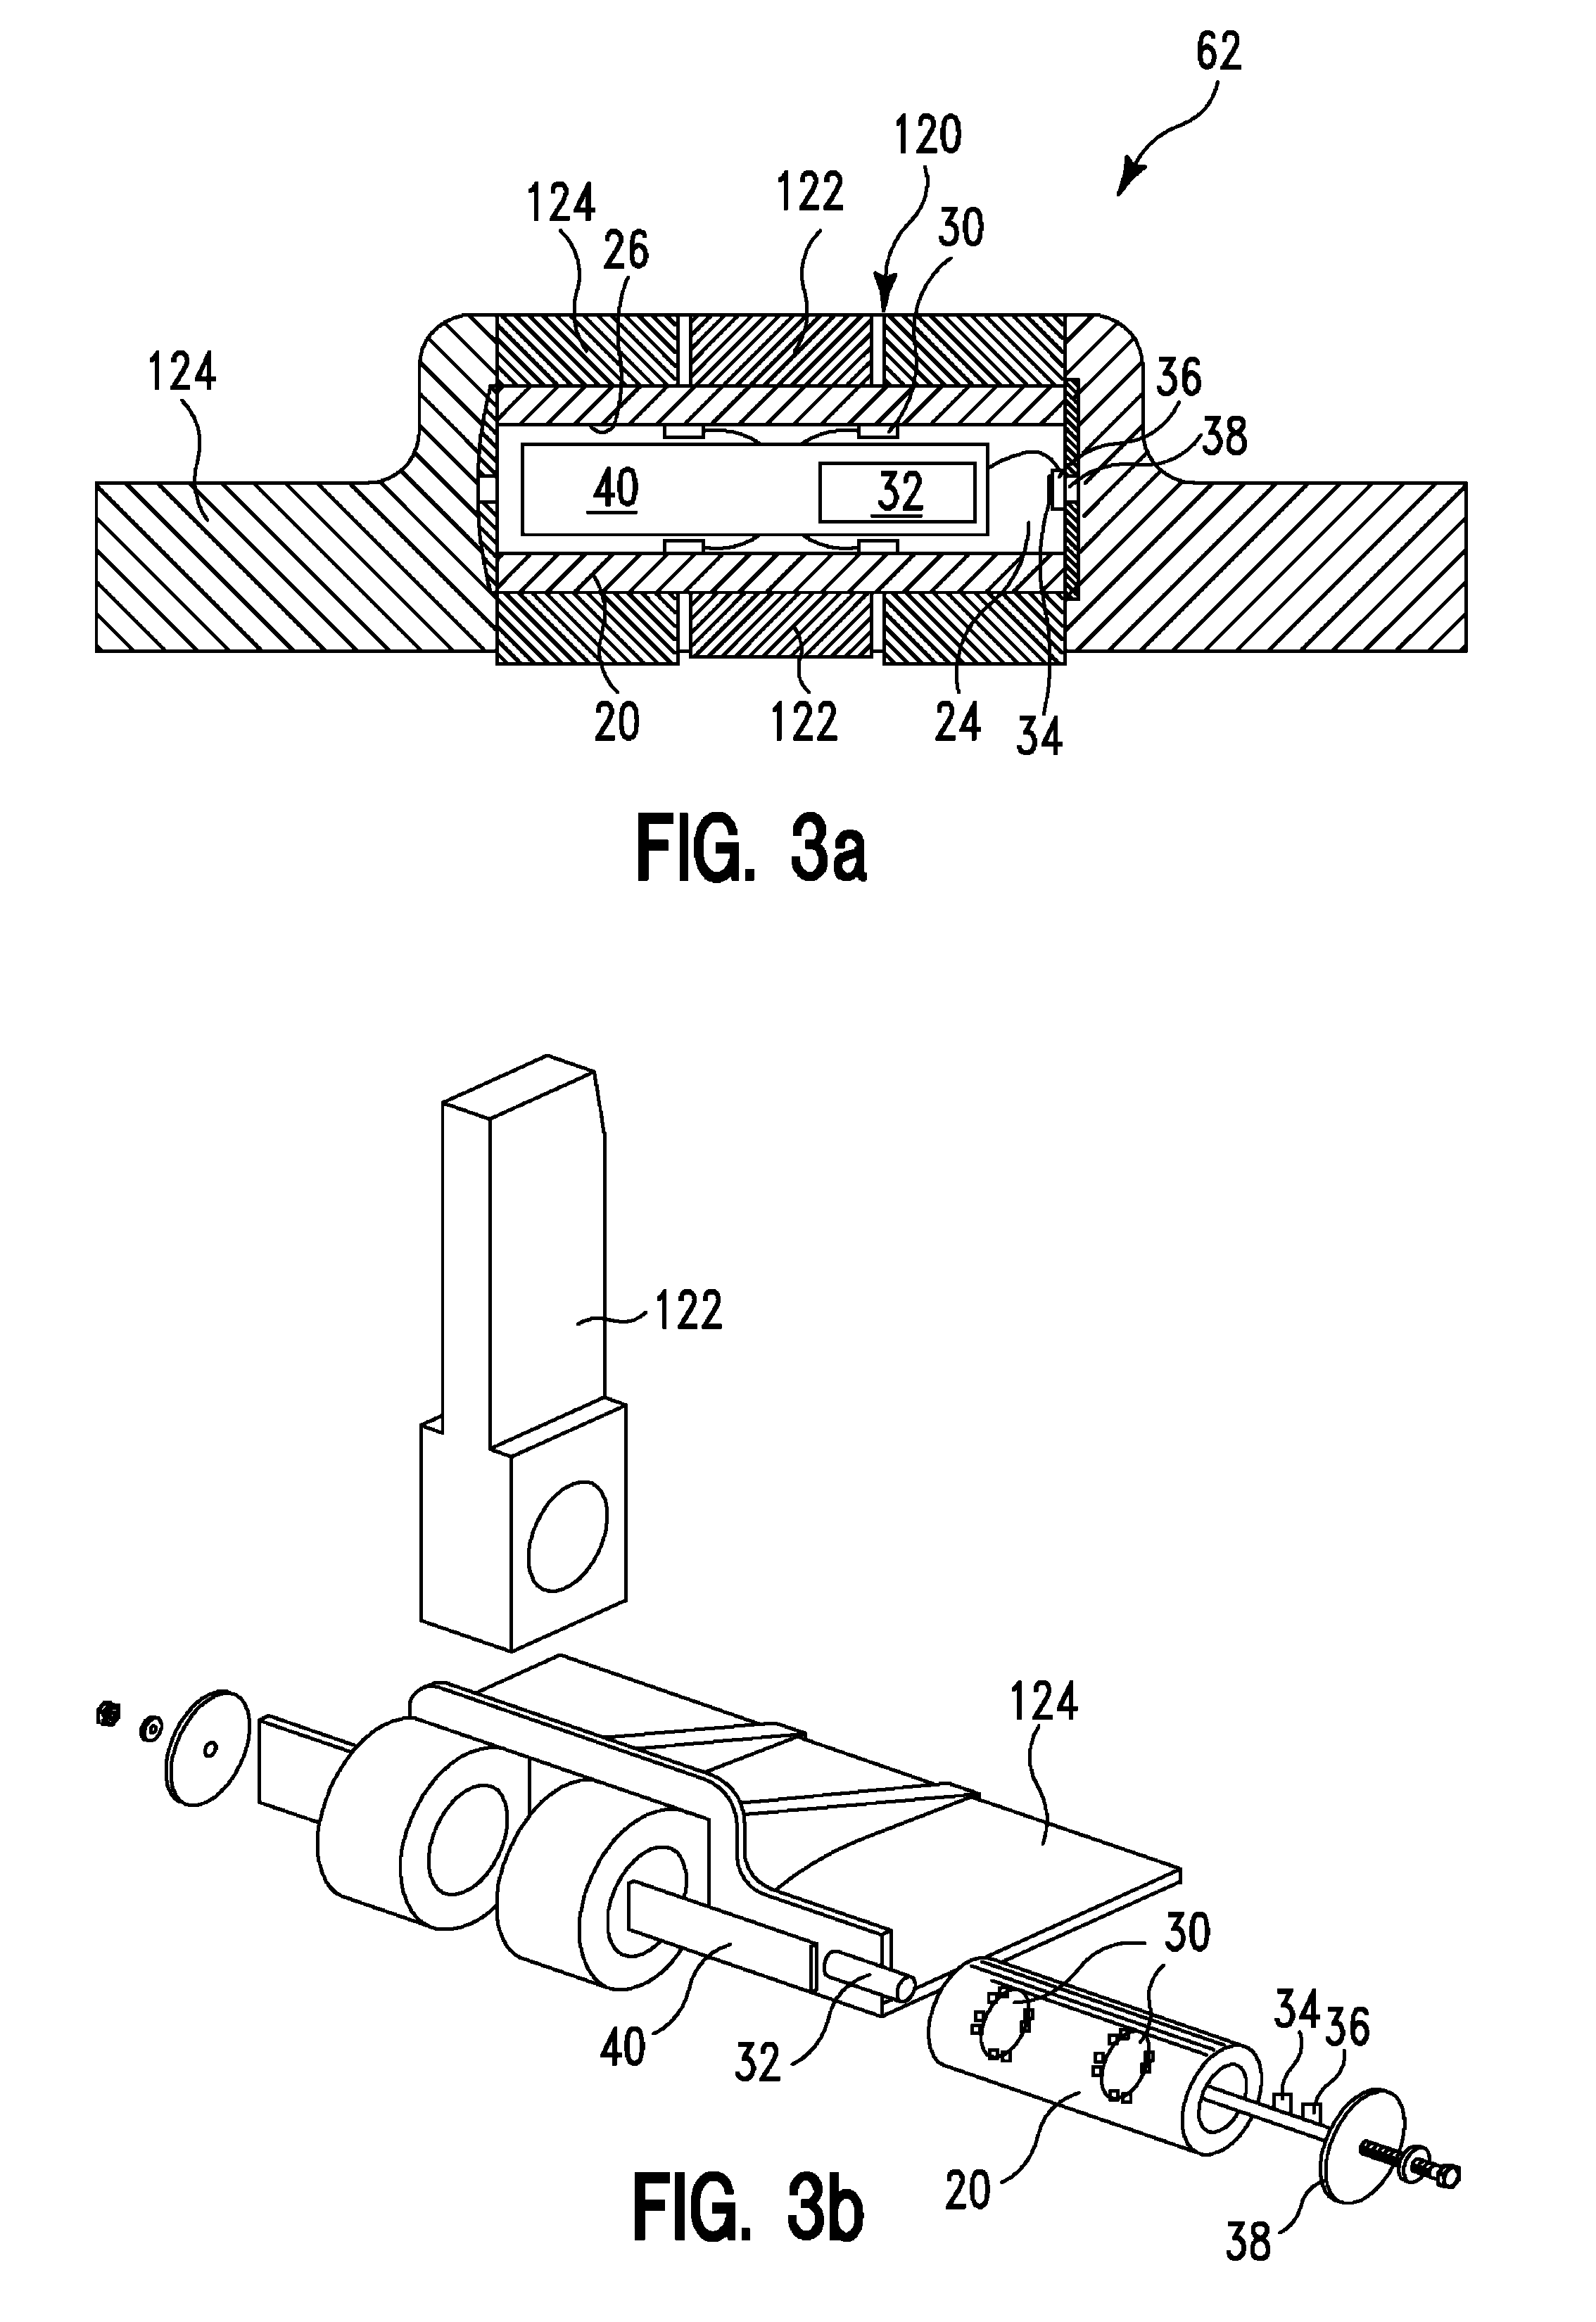 Independently calibrated wireless structural load sensor